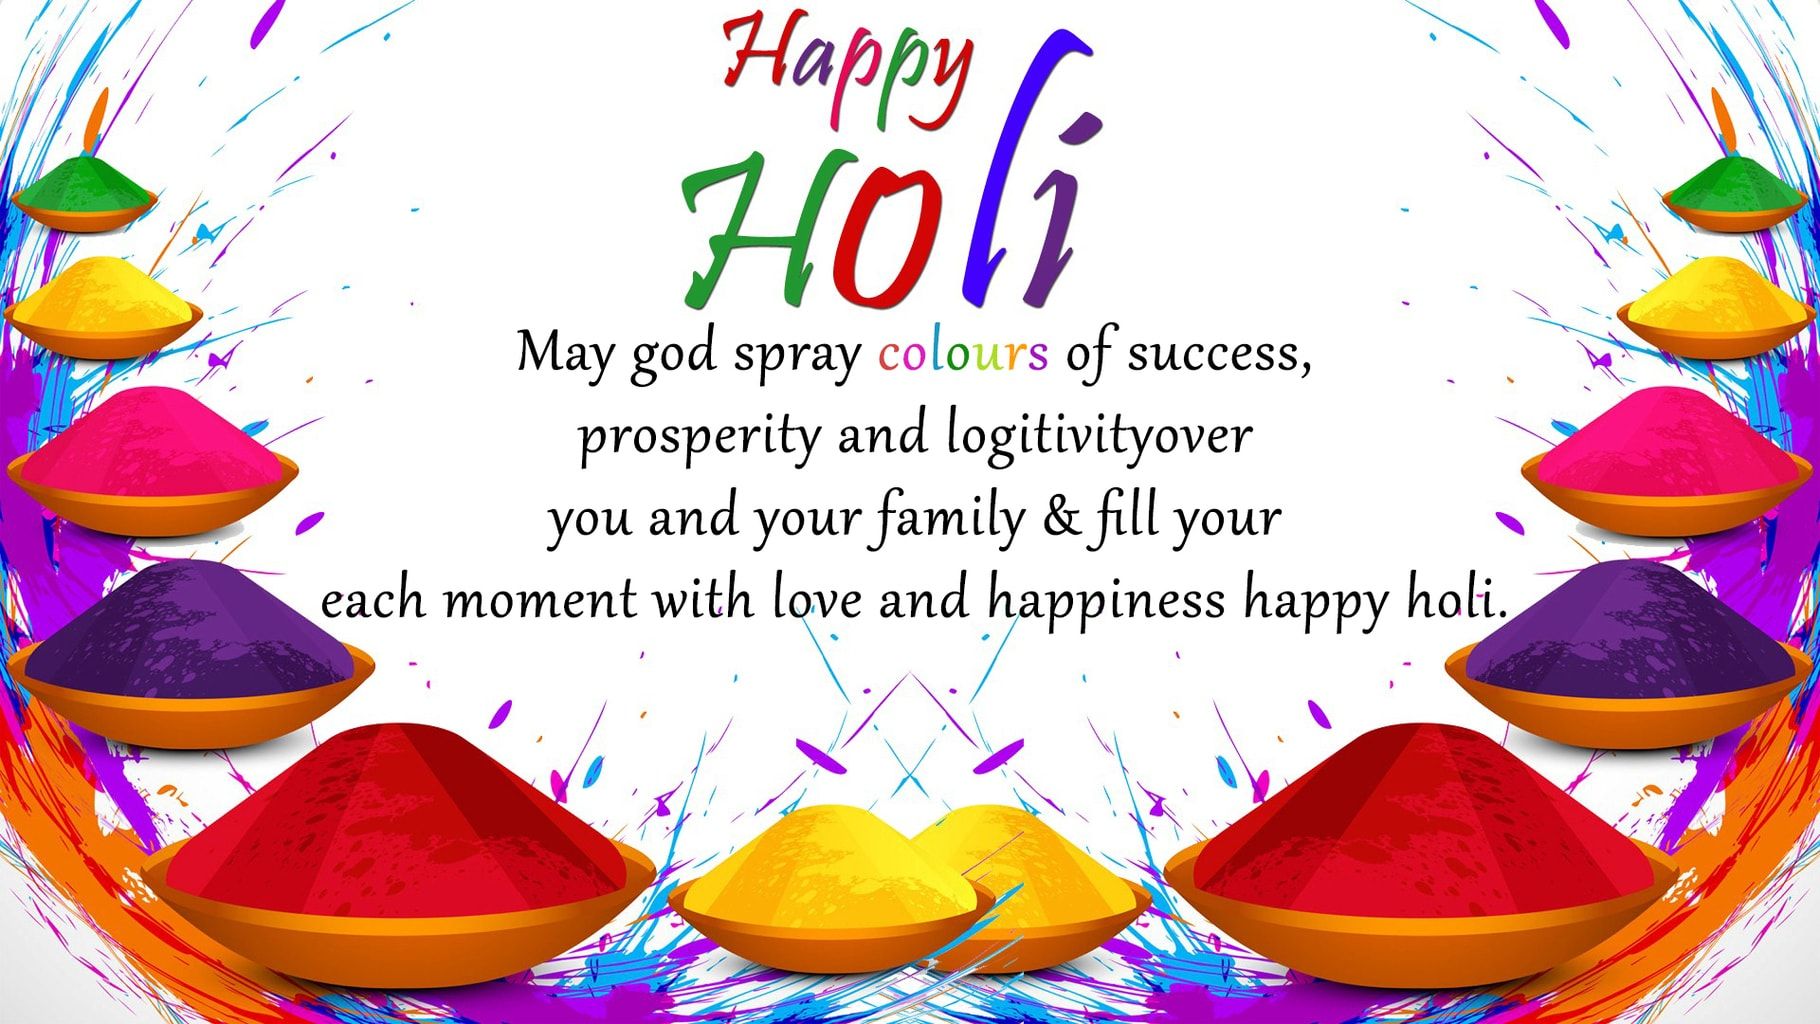 Happy Holi 2020: Messages, Wishes, Quotes, Image, Status, Wallpaper for your loved ones